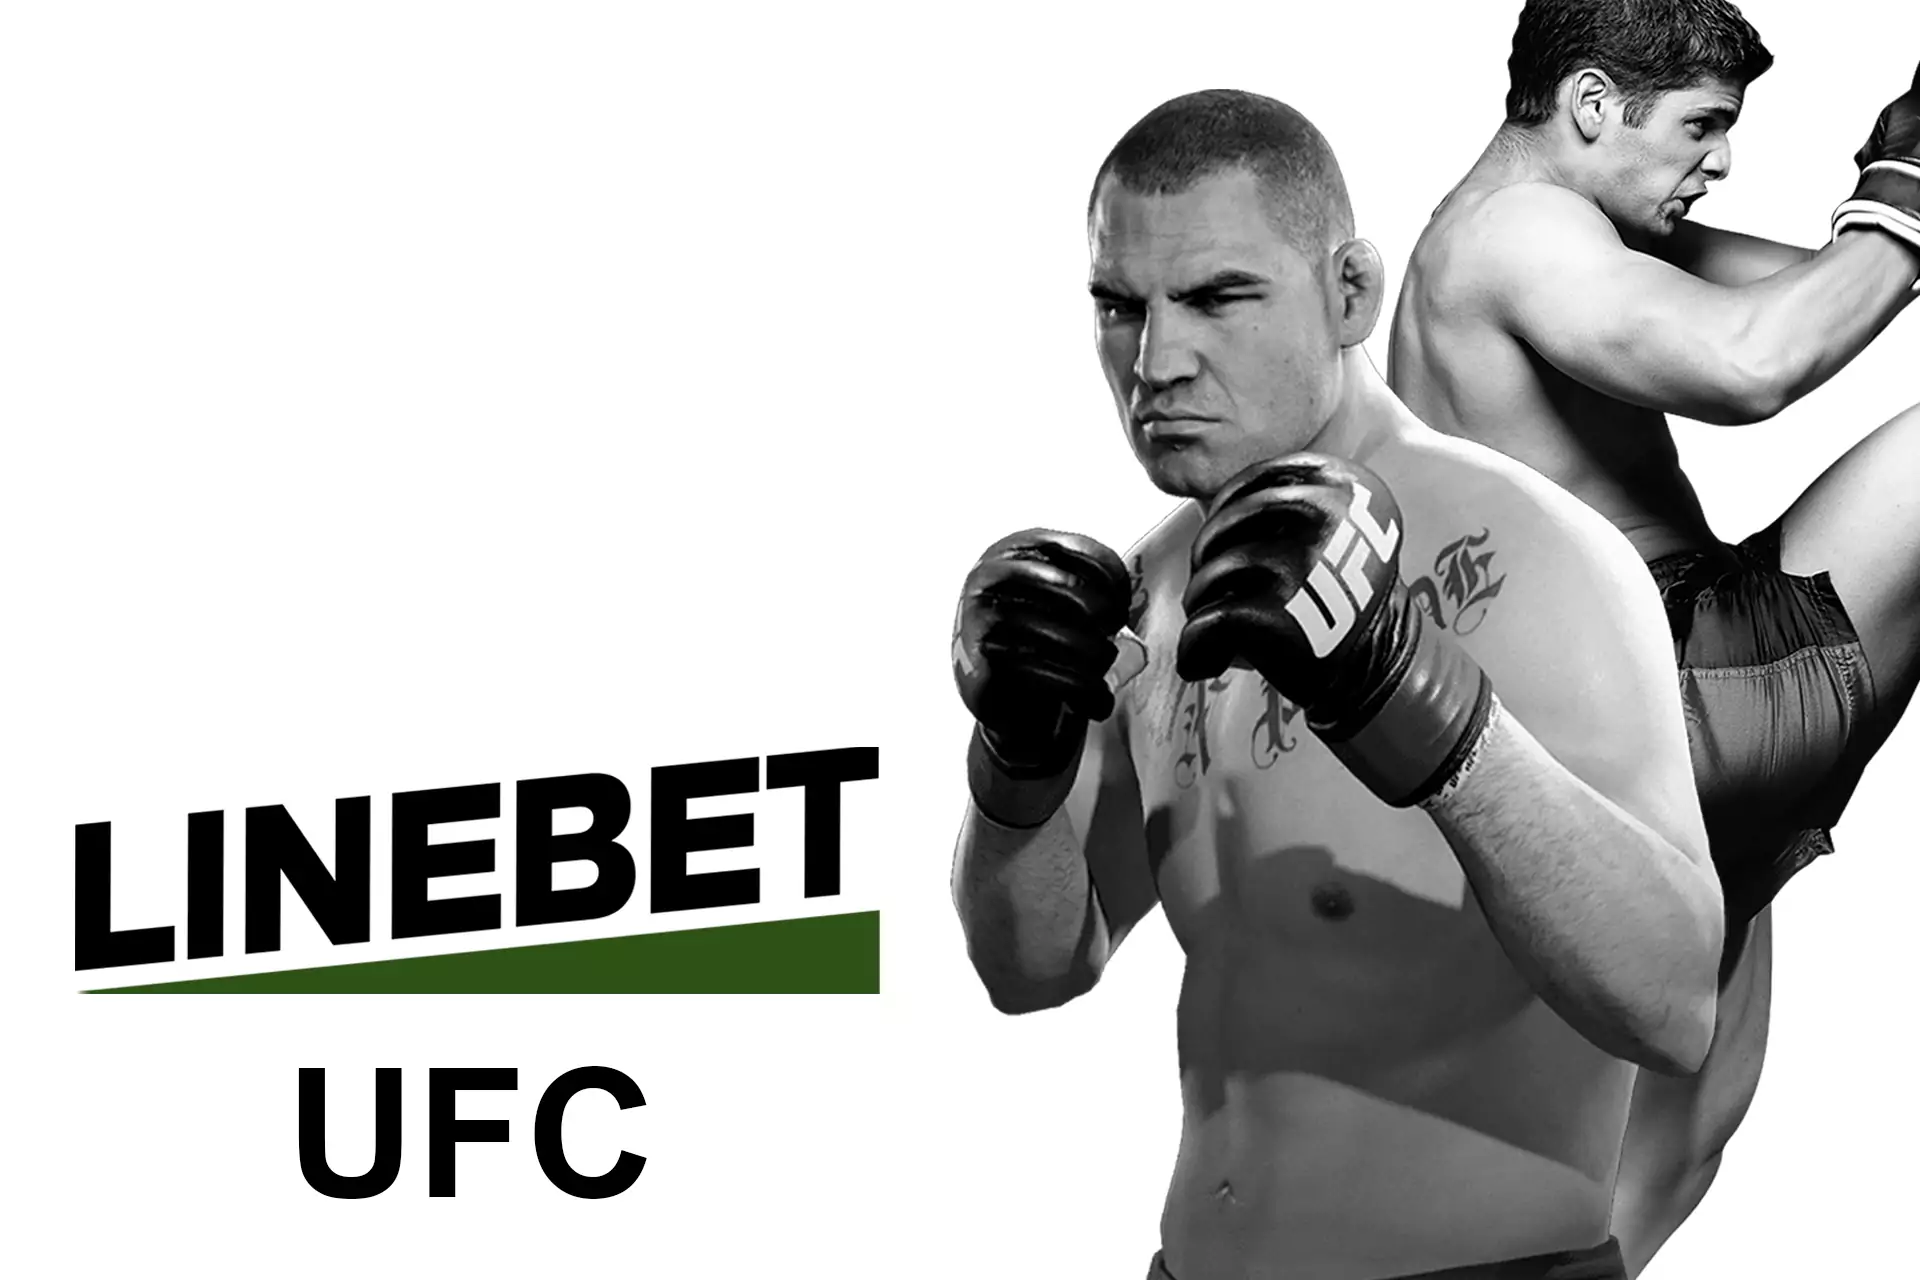 Also, there is the UFC section for betting at Linebet.